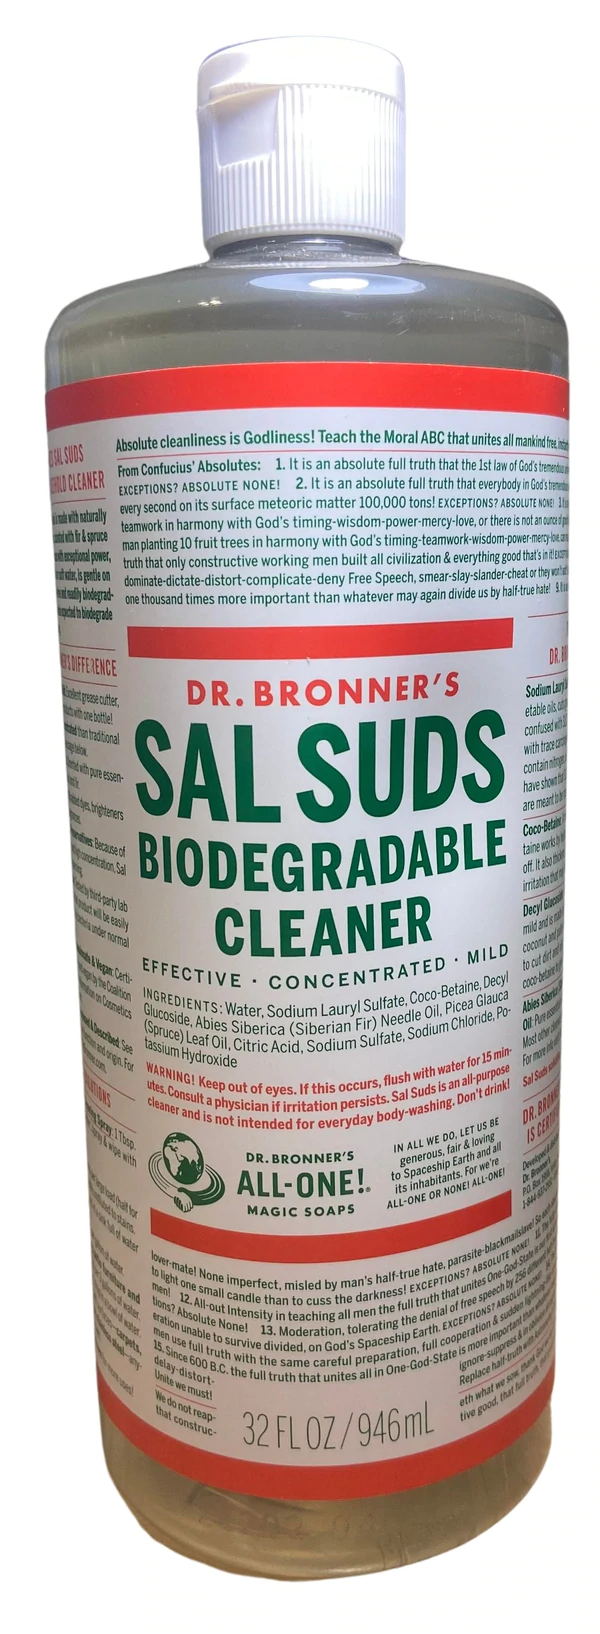 DR BRONNERS SAL SUDS BIODEGRADABLE CLEANER